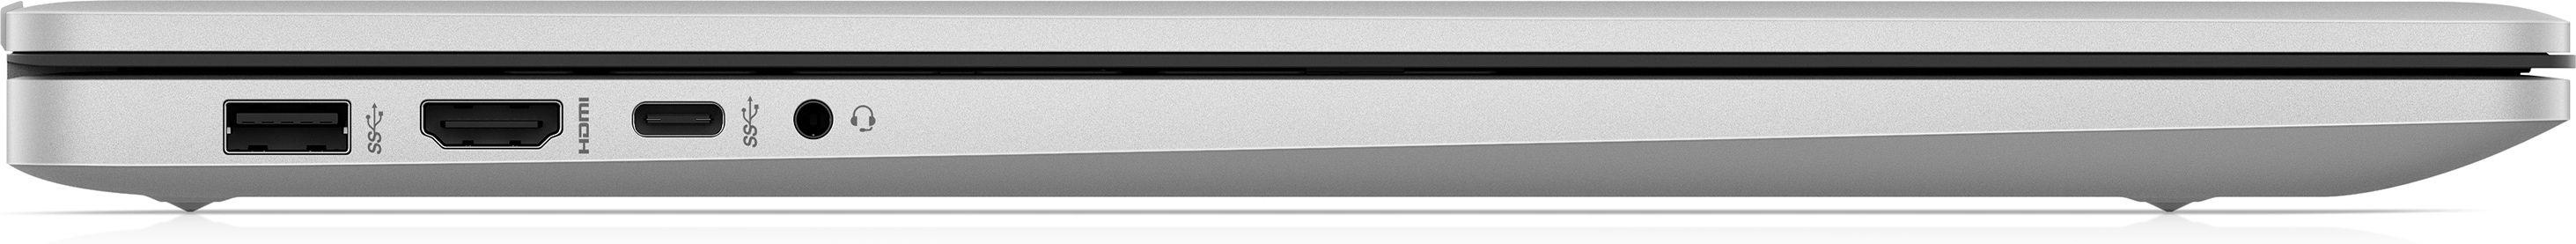 HP 17-cn0053cl i5-1135G7 17,3"FHD AG 250nit IPS 12GB_3200MHz 1TB IrisXe BT BLK USB-C Cam720p 41Wh Win10 (REPACK) 2Y Natural Silver